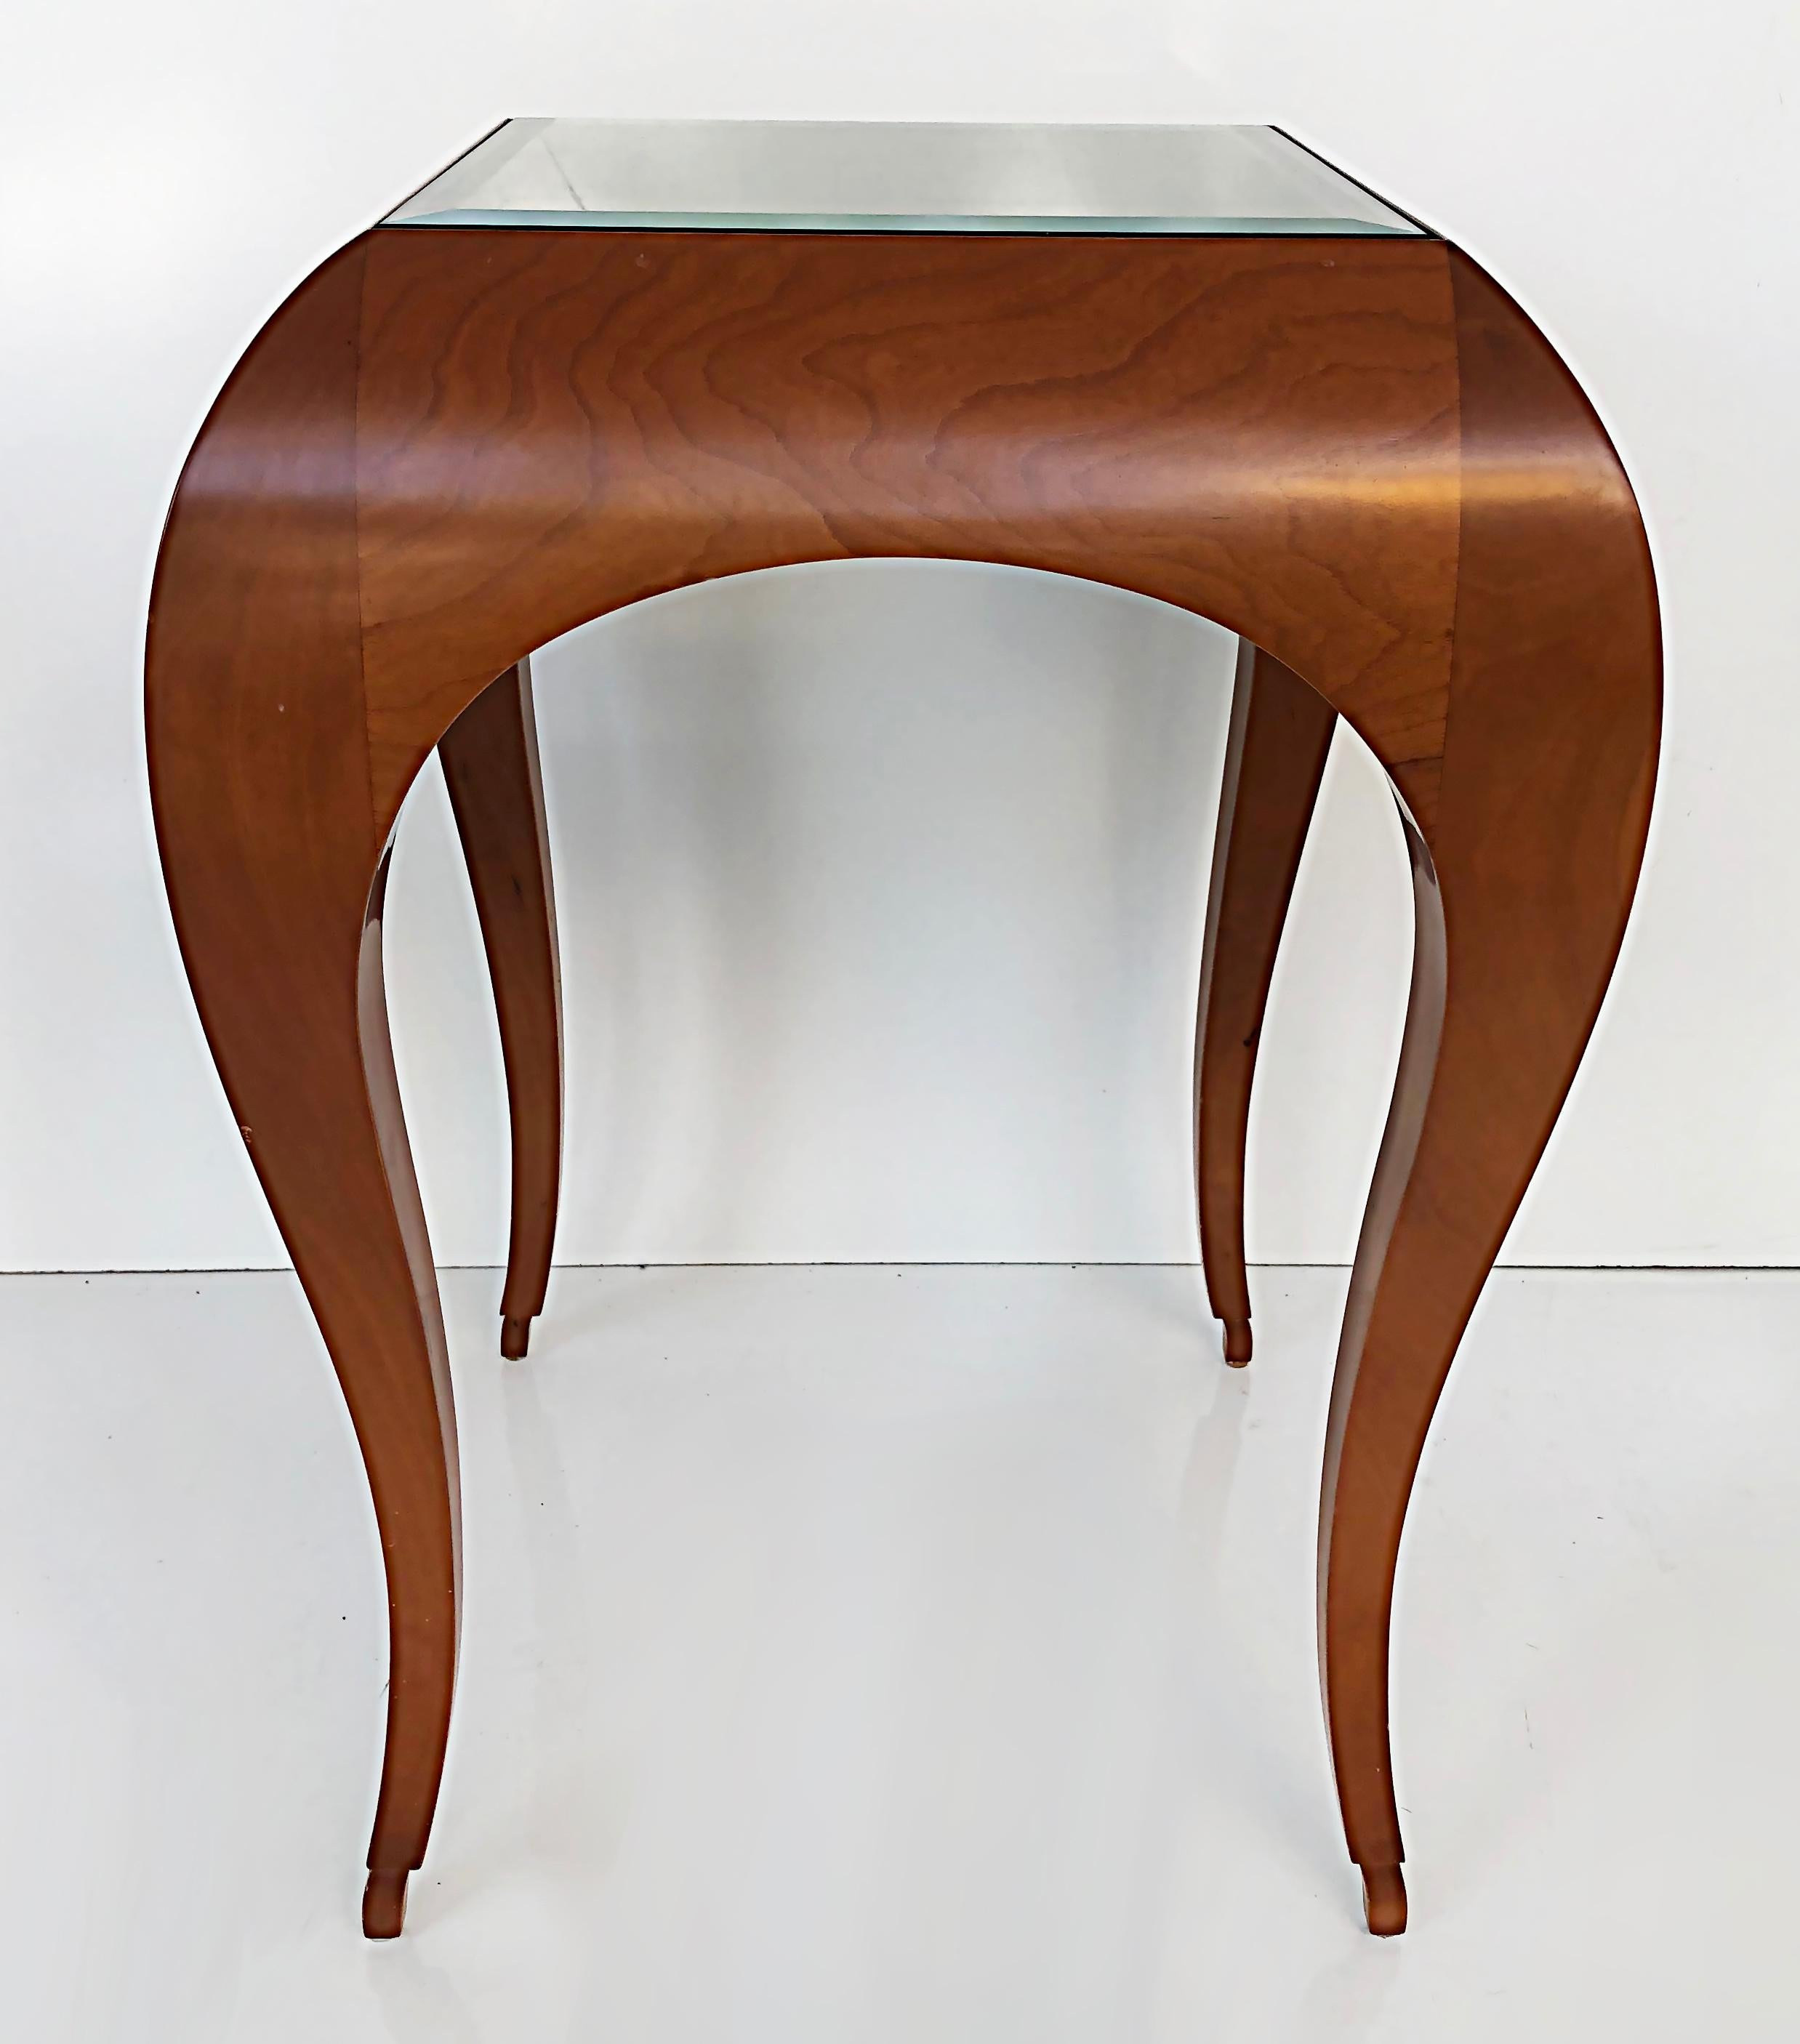 Stylized Curved Wood Side Tables, Manner of René Prou

Offered for sale is a pair of sinuously curved wood side tables with inset glass tops. These late 20th-century tables have been created in the manner of René Prou. The glass tops could be